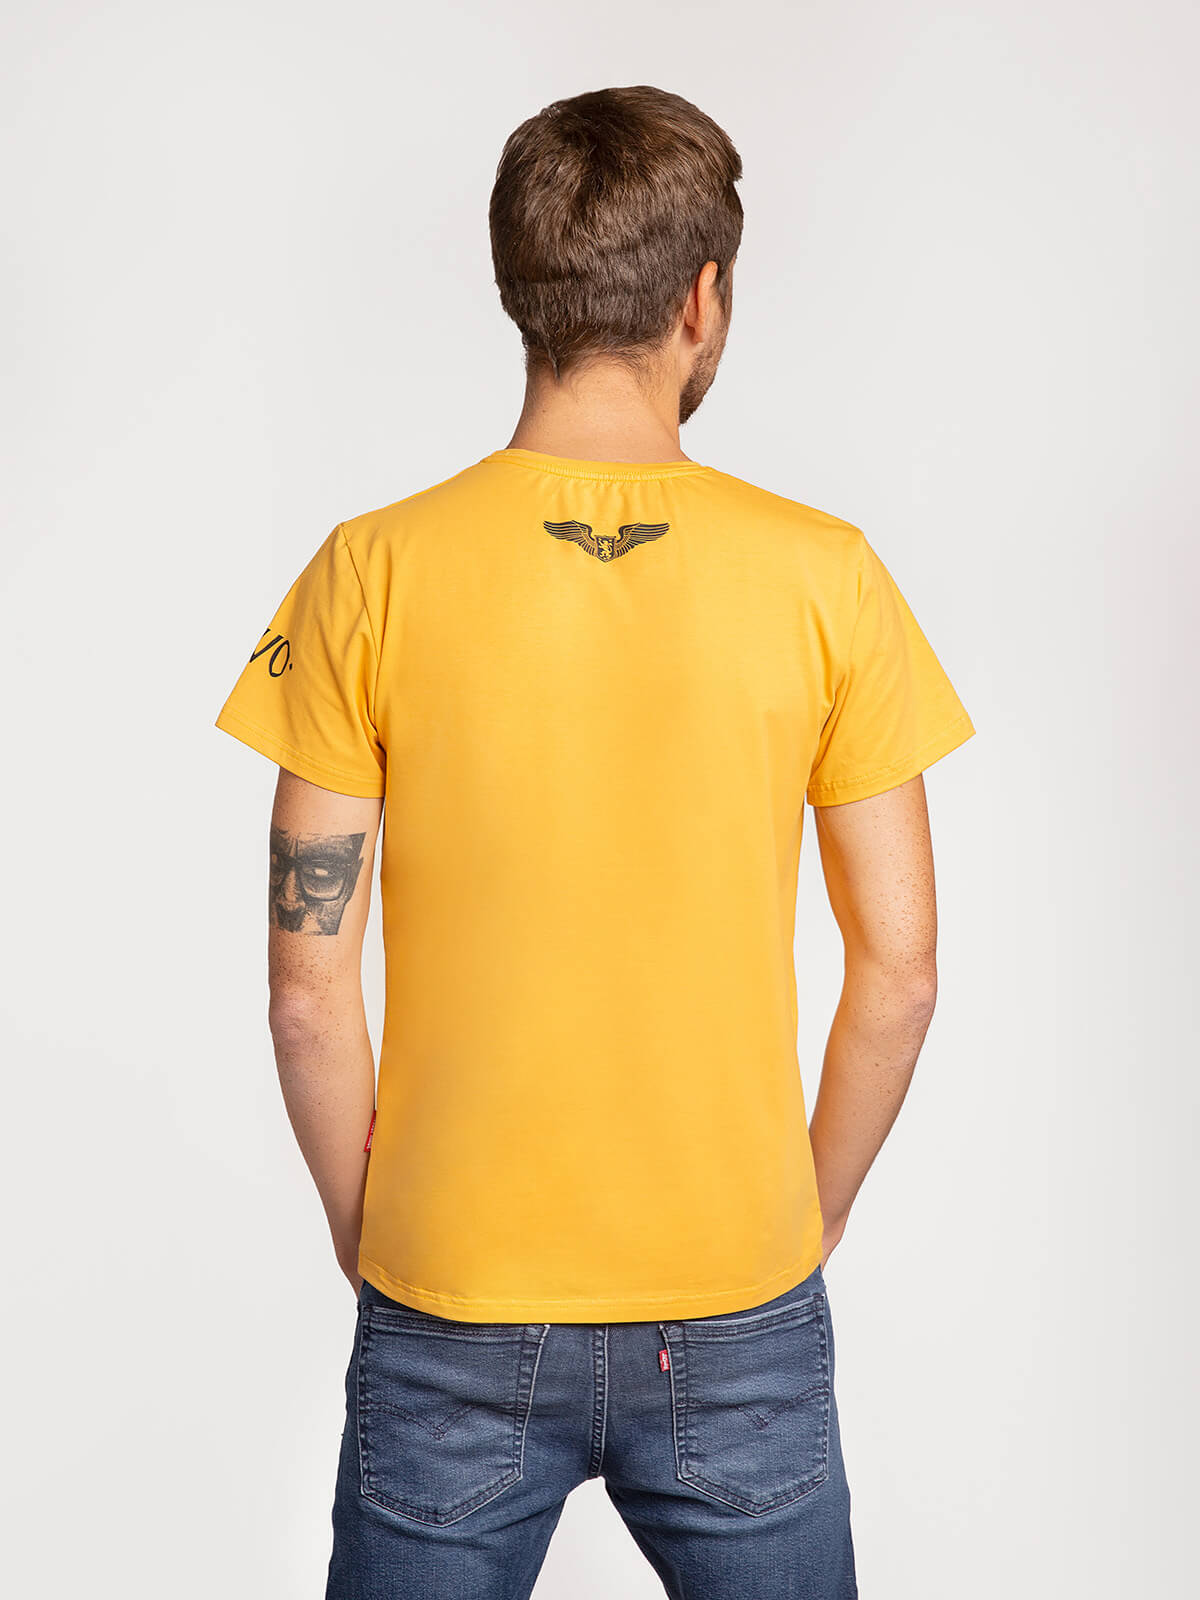 Men's T-Shirt Danylo. Color yellow. 
Technique of prints applied: silkscreen printing.